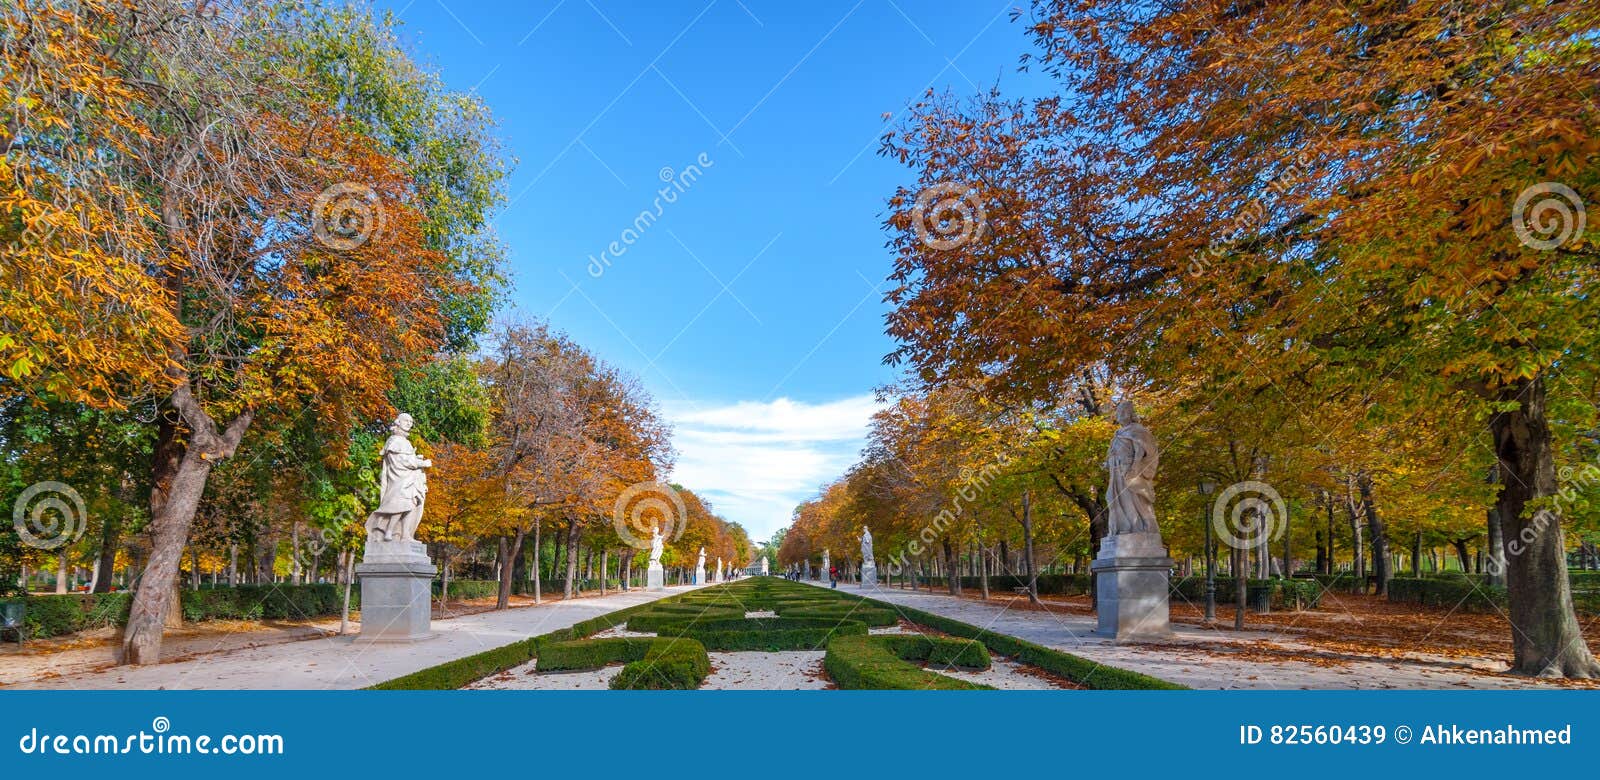 Fall in love with Madrid's Retiro Park 